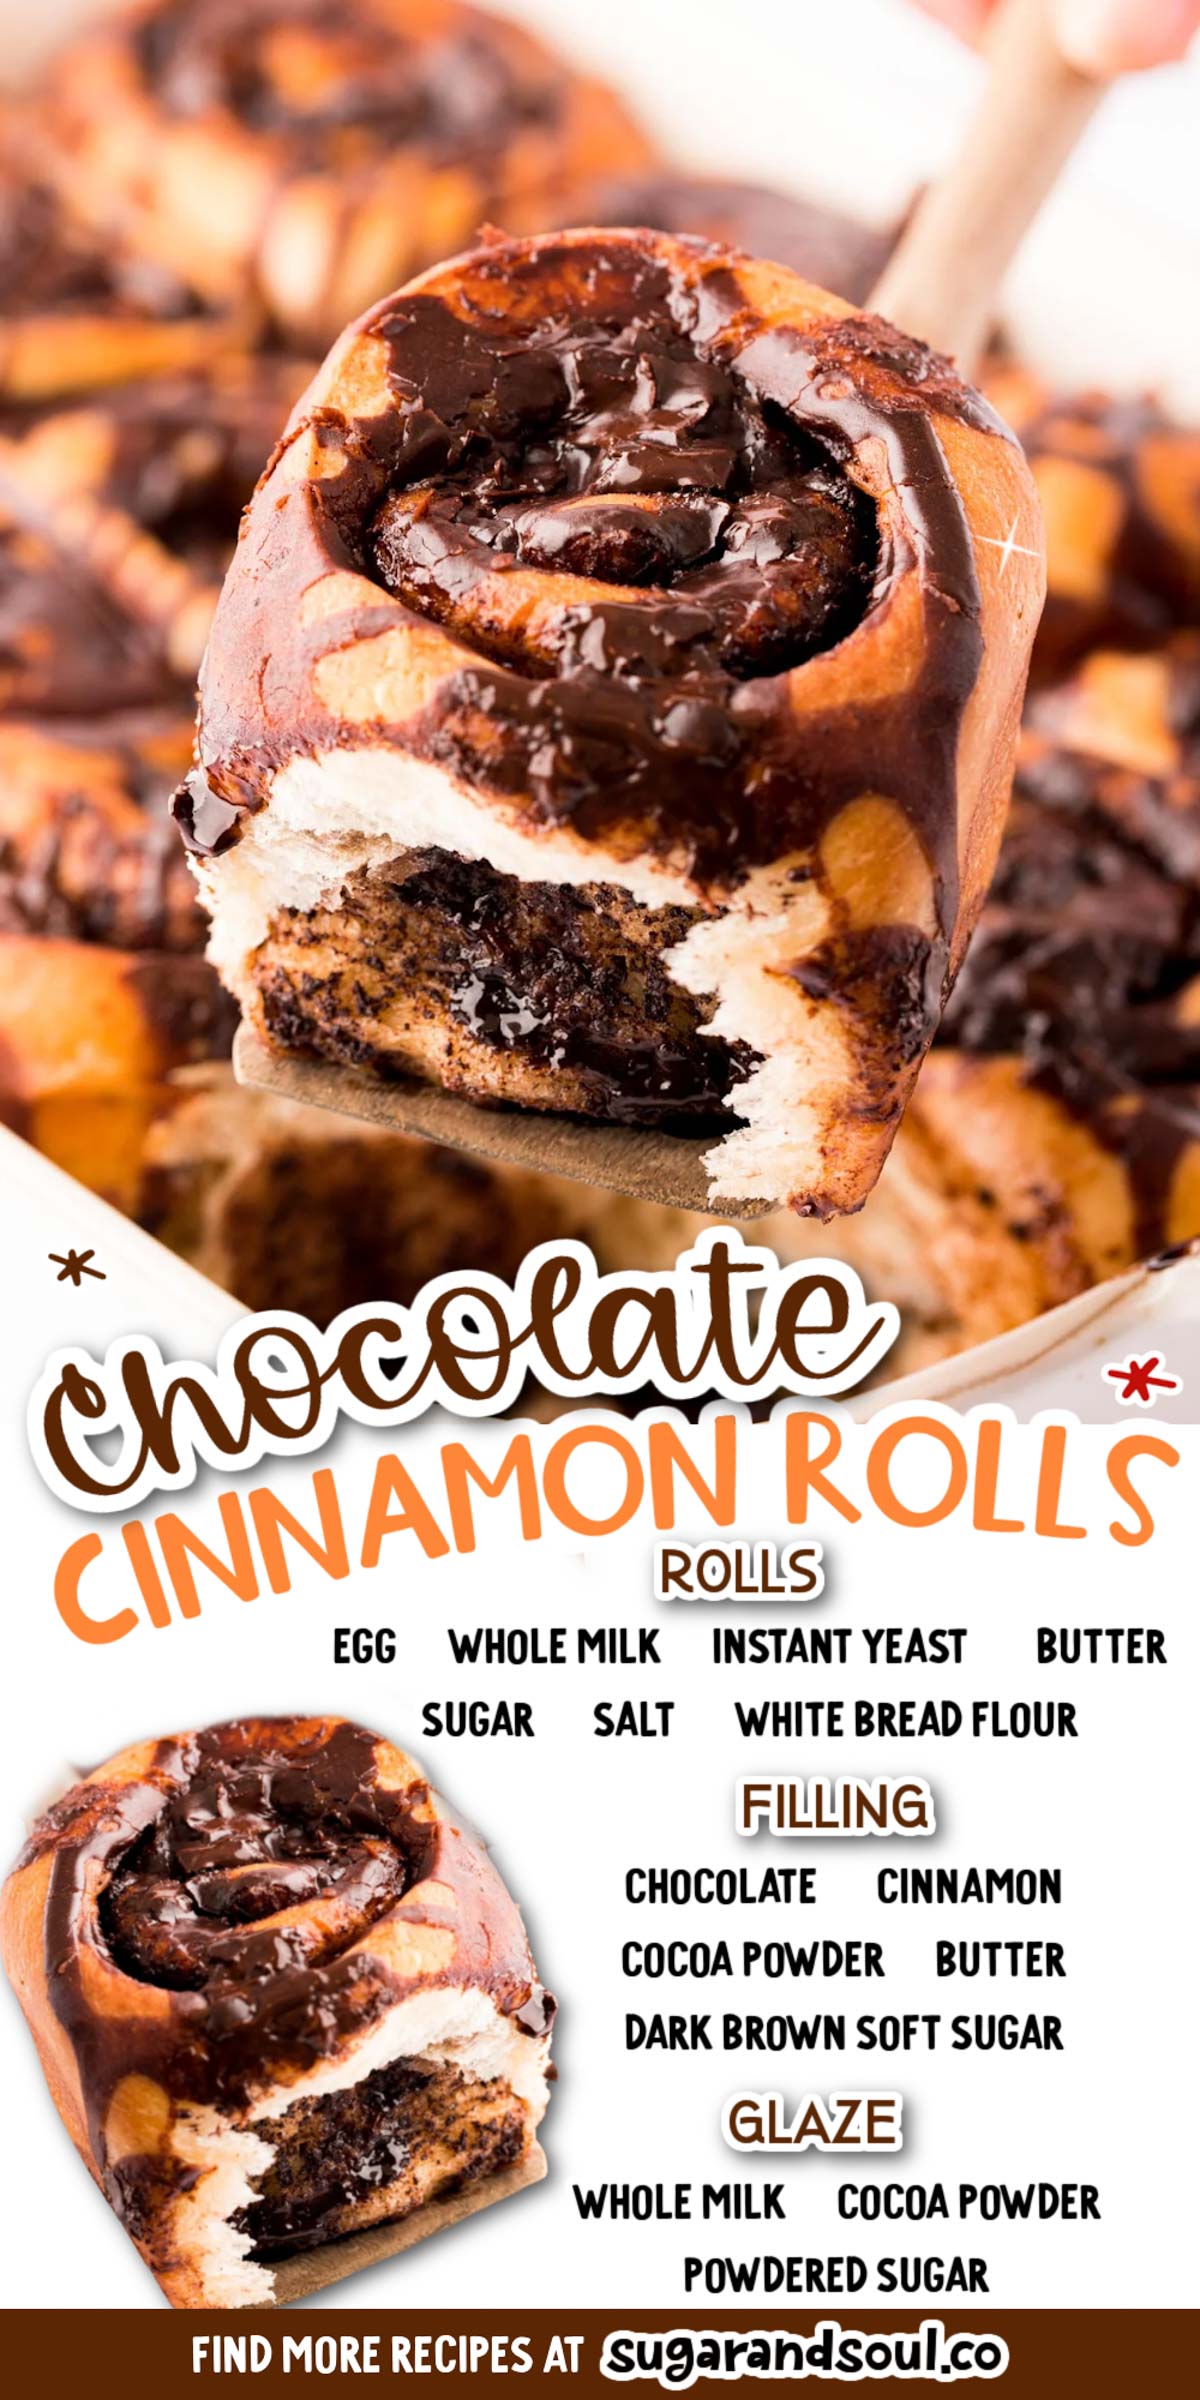 Chocolate Cinnamon Rolls are golden brown yeast rolls filled with a sweet chocolate cinnamon filling and topped with chocolate glaze! Make this breakfast treat using pantry staples in less than two and a half hours! via @sugarandsoulco